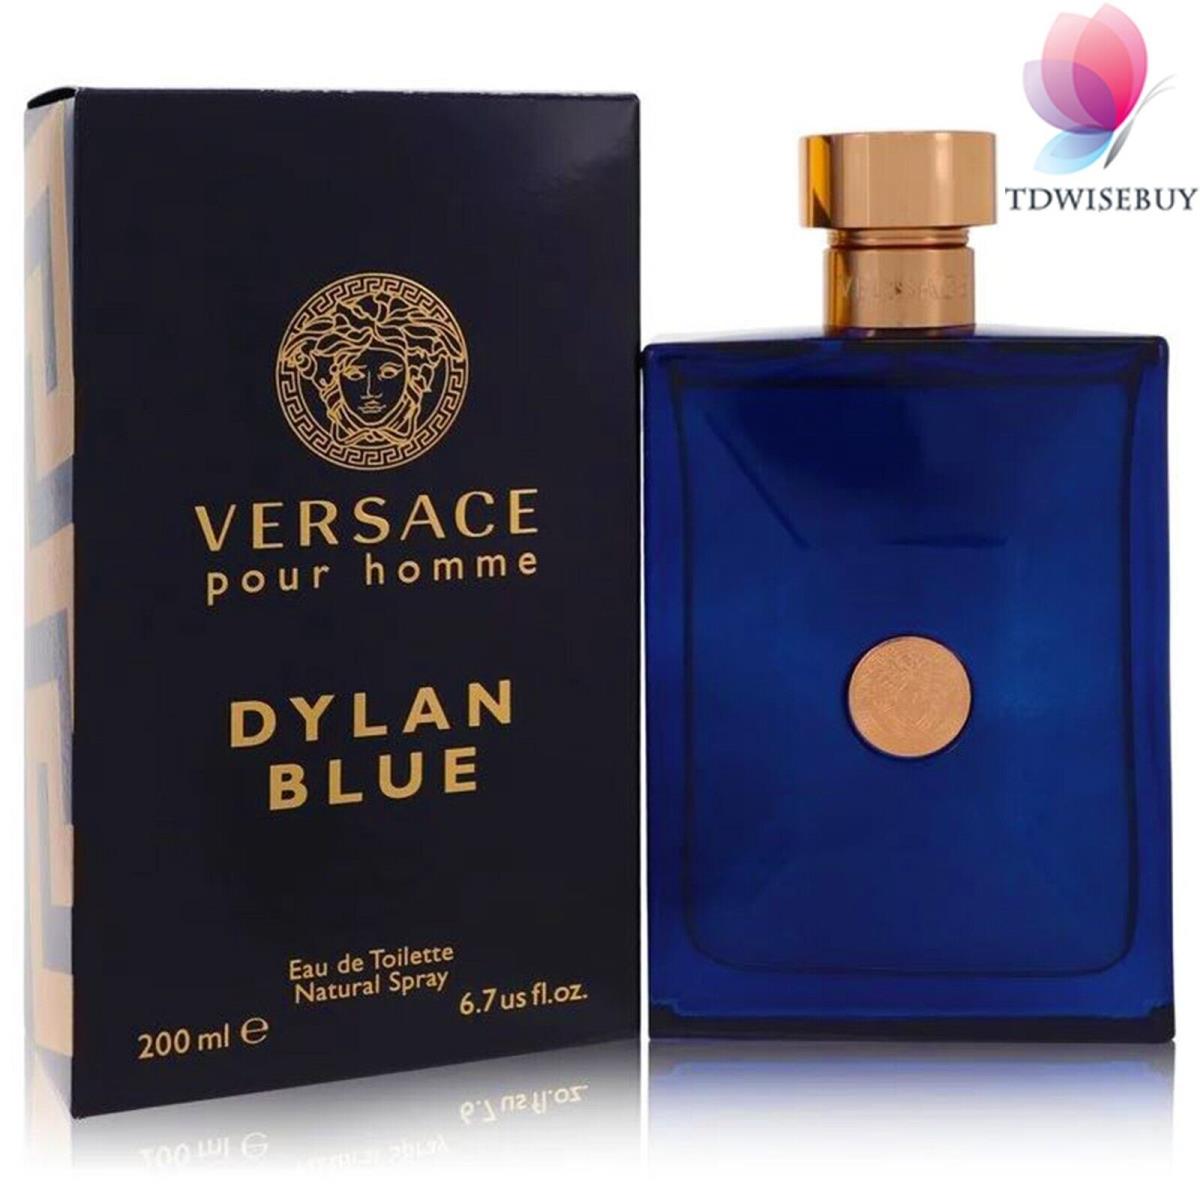 Versace Pour Homme Dylan Blue Cologne Men Perfume by Versace Edt Spray 6.7 oz